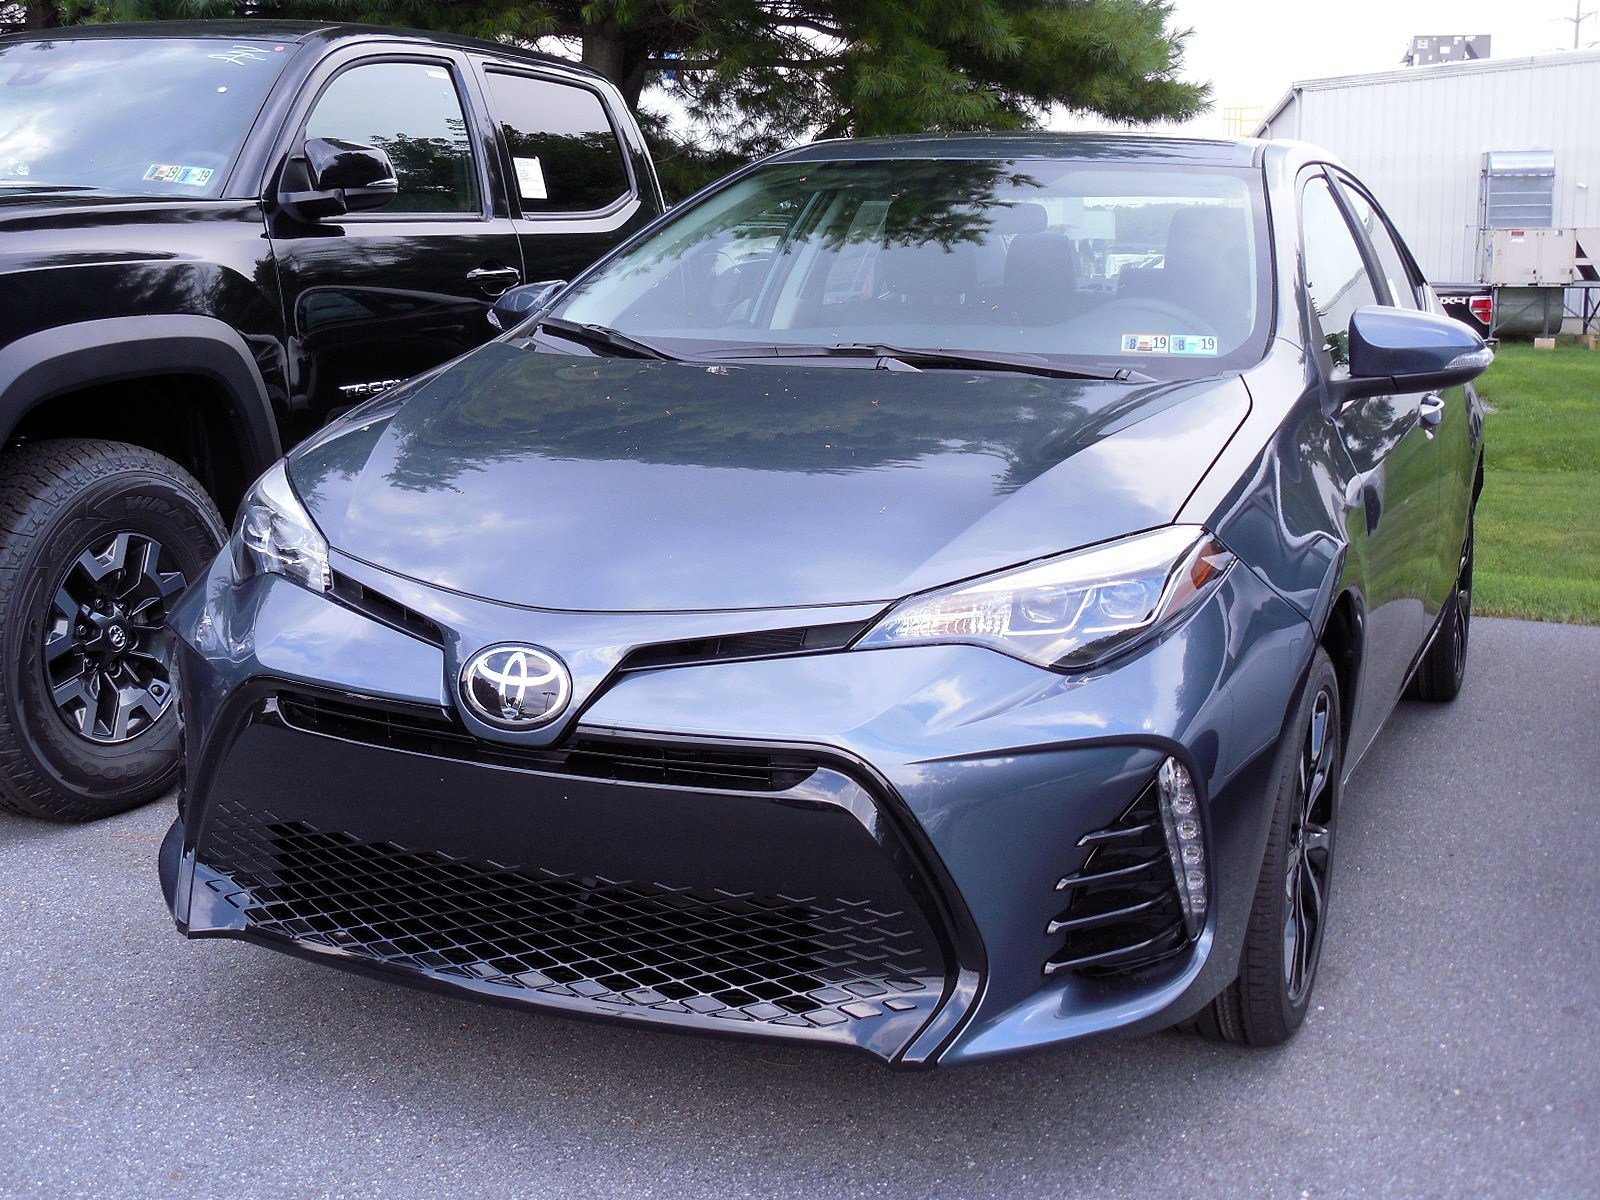 New 2019 Toyota Corolla SE 4dr Car in East Petersburg